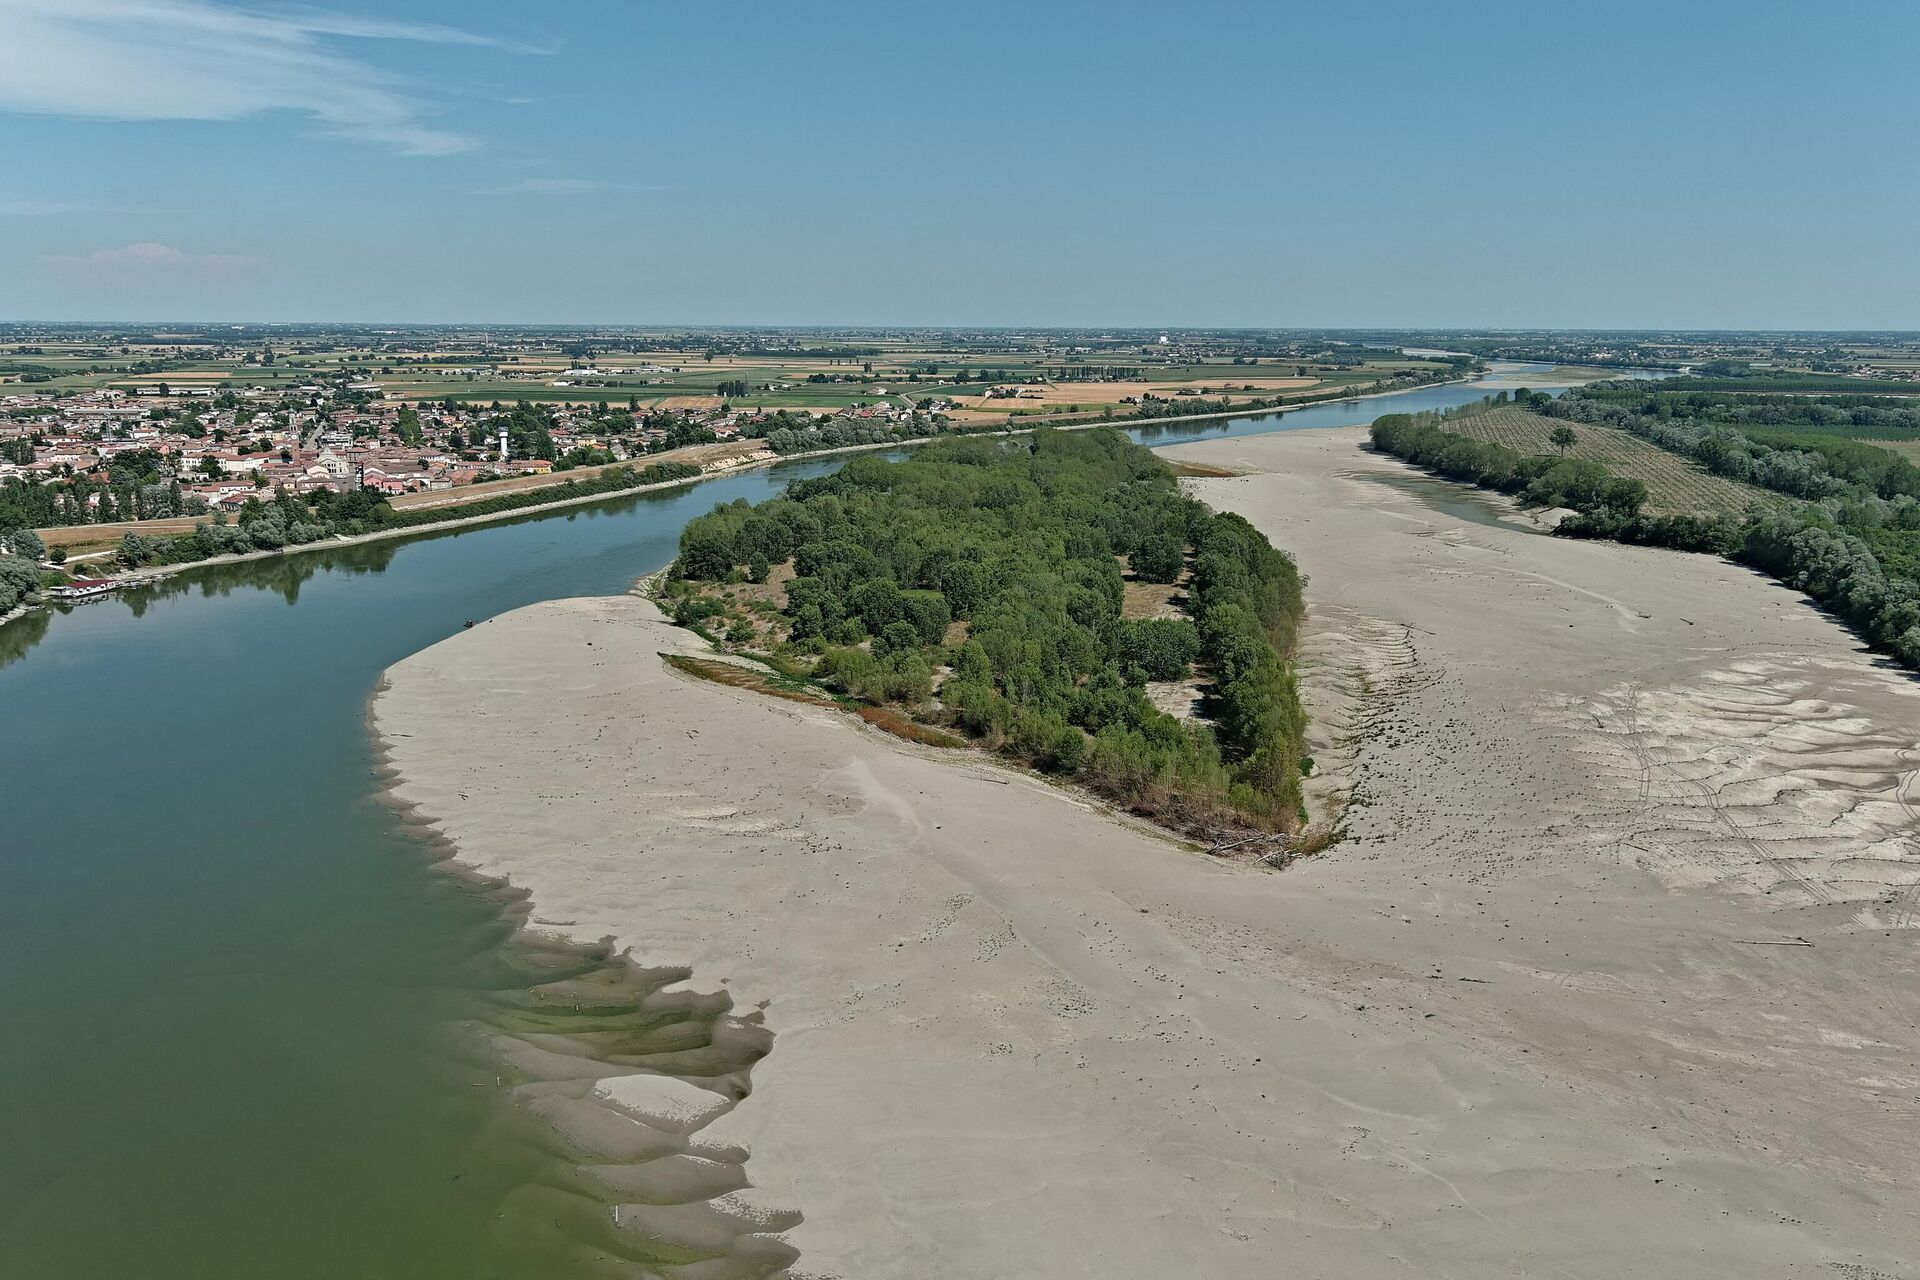 The Po River in the area of the municipality of Castelmassa, in the region of Veneto, were water is rationed amid the worst drought to affect northern Italy’s rivers in 70 years. - Sputnik International, 1920, 22.02.2023